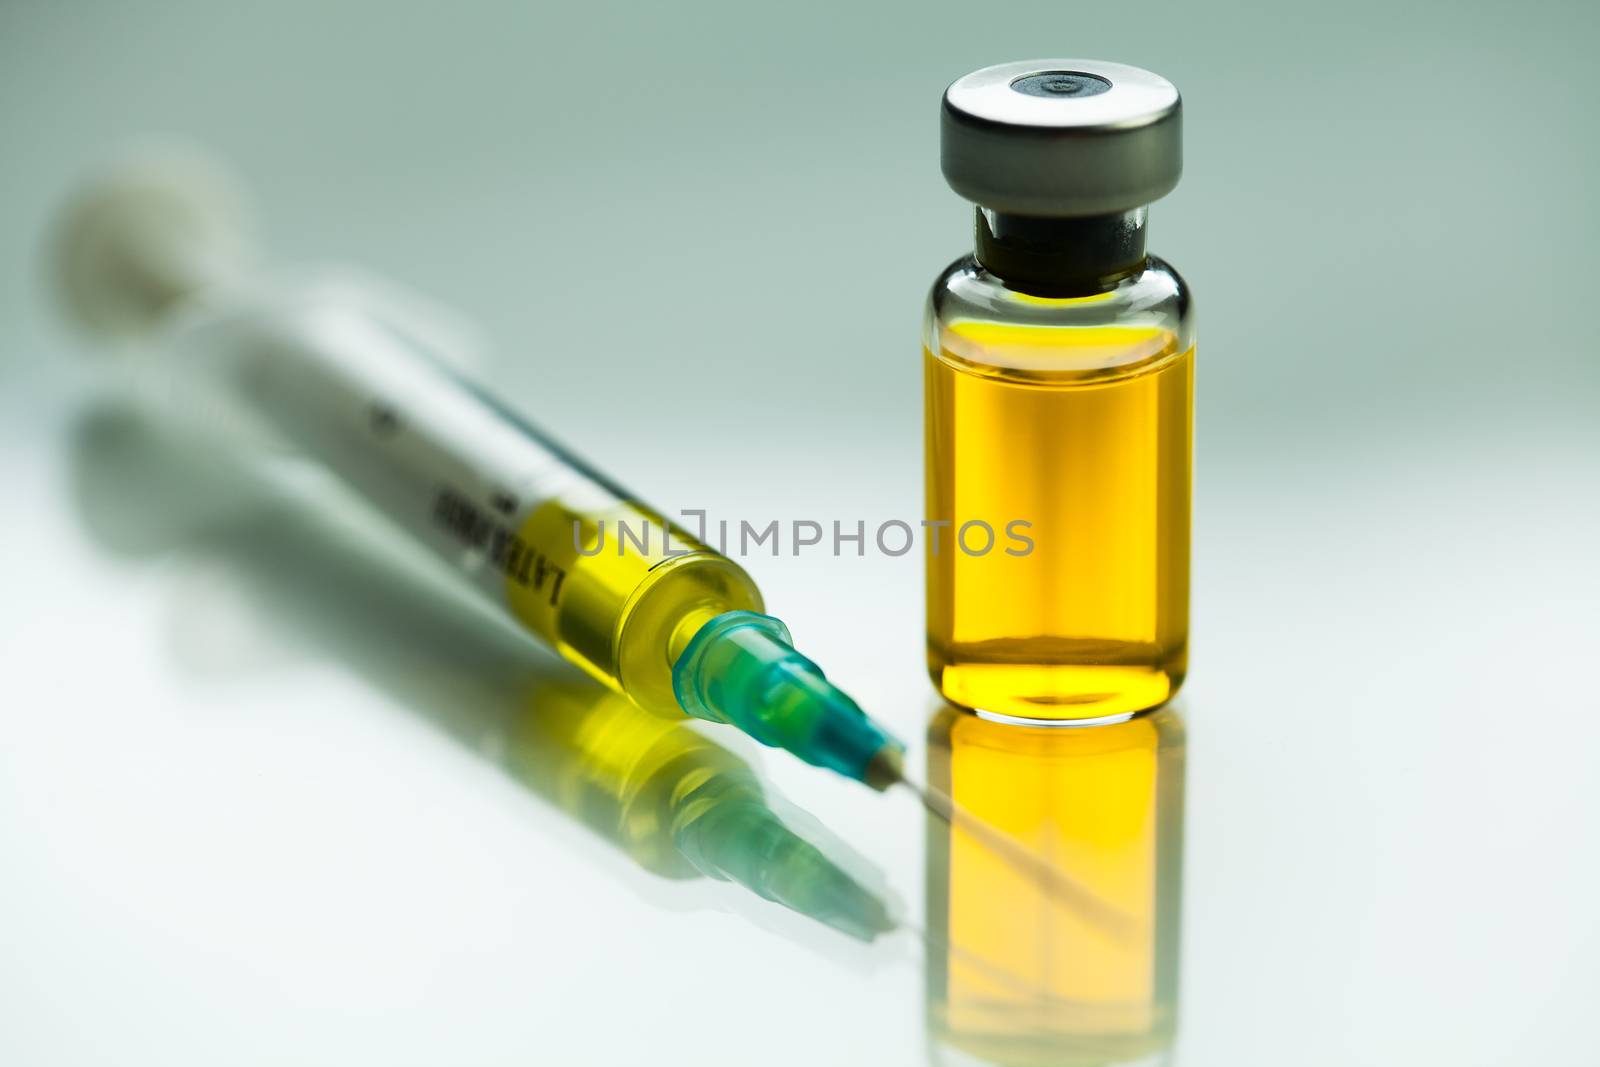 Syringe with needle & vial ampoule with yellow liquid by Plyushkin